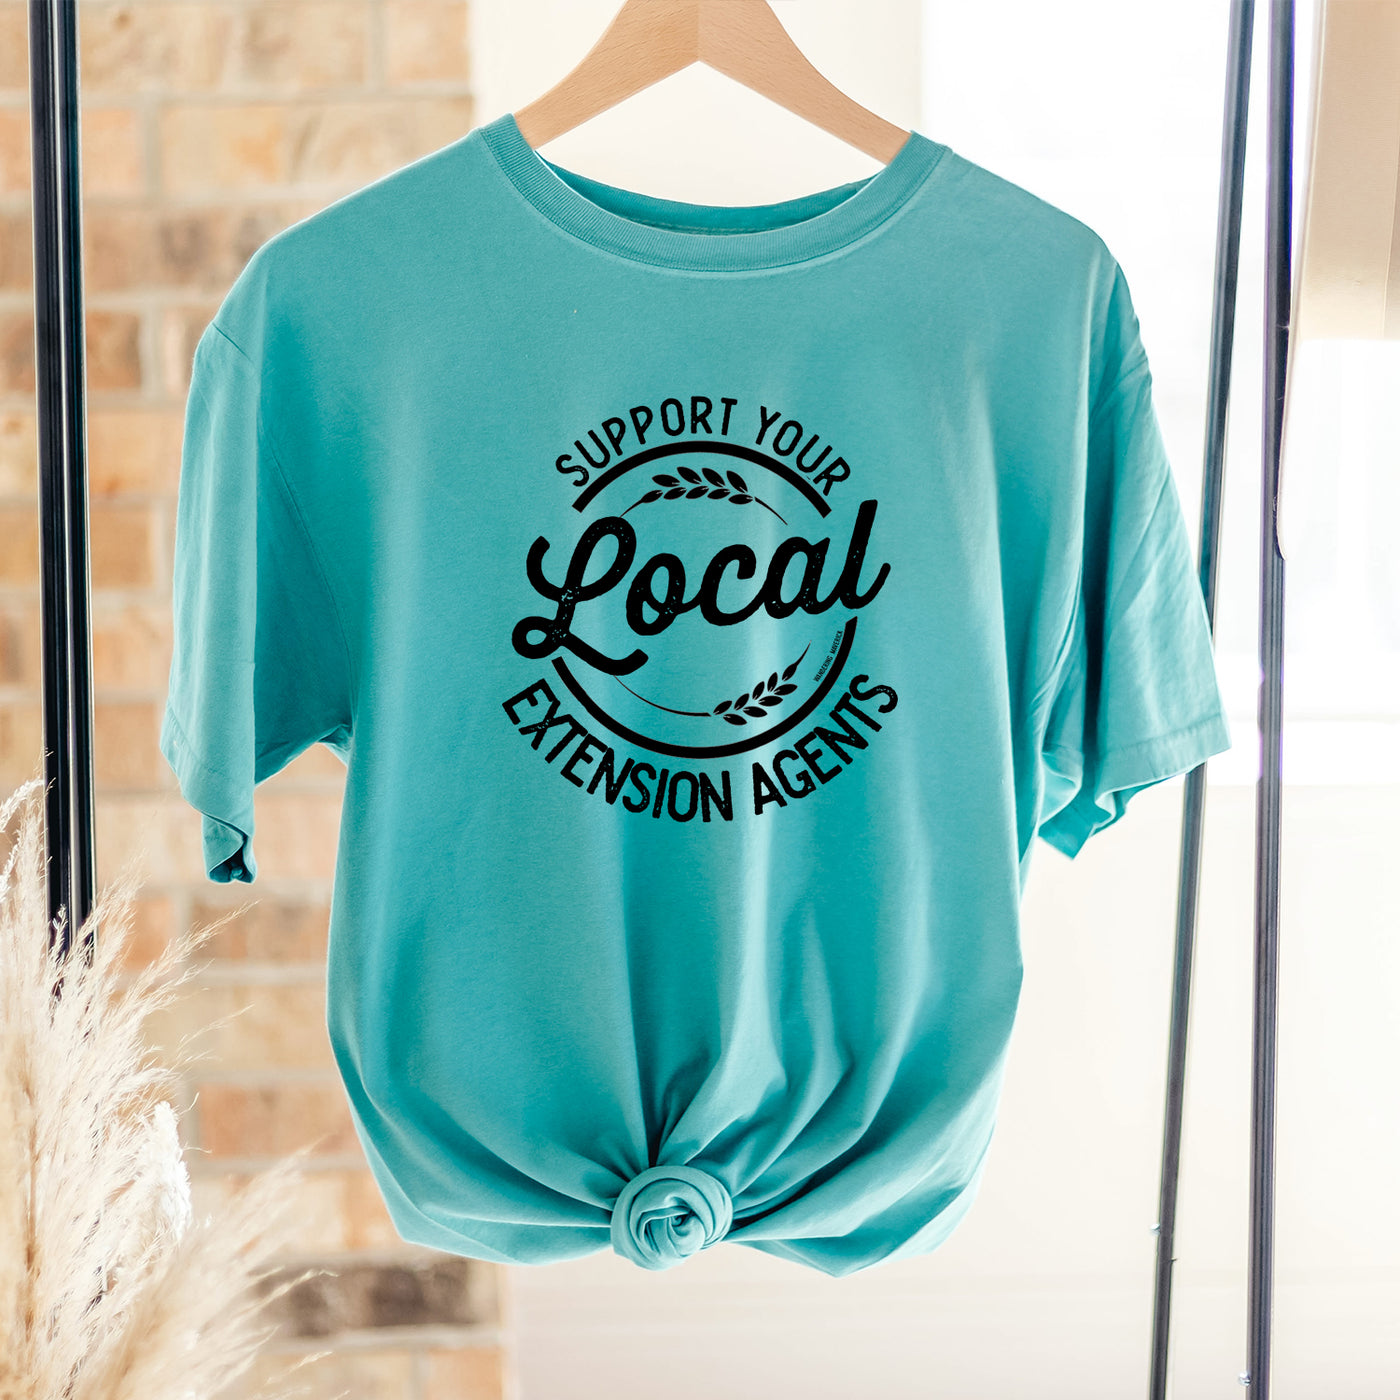 Support Your Local Extension Agents T-Shirt (XS-4XL) - Multiple Colors!